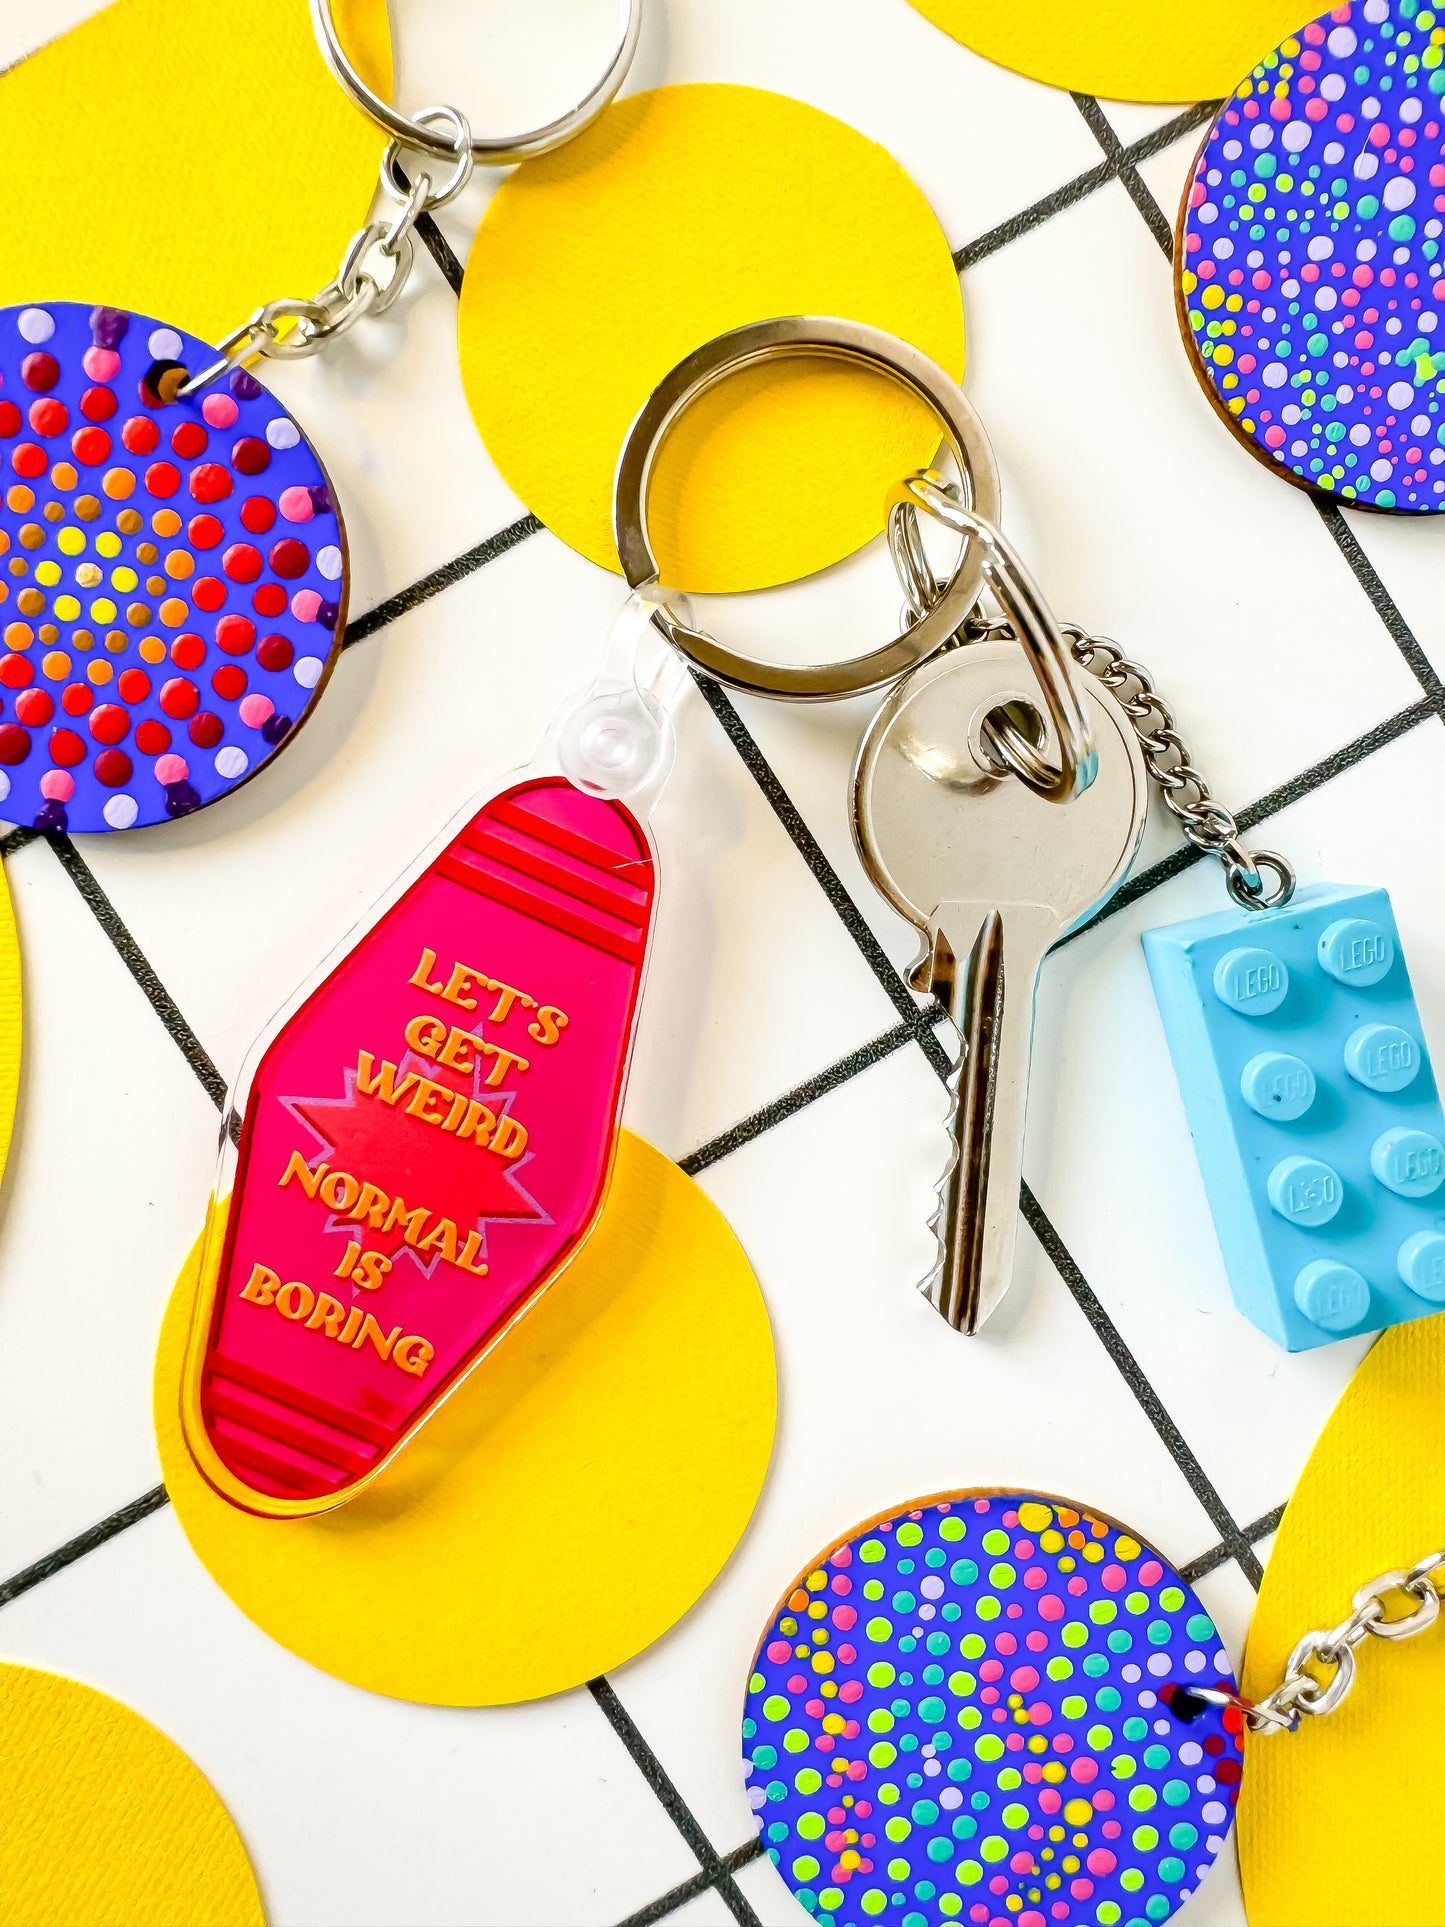 Stoofy “Let’s Get Weird” Motel Style Keyring